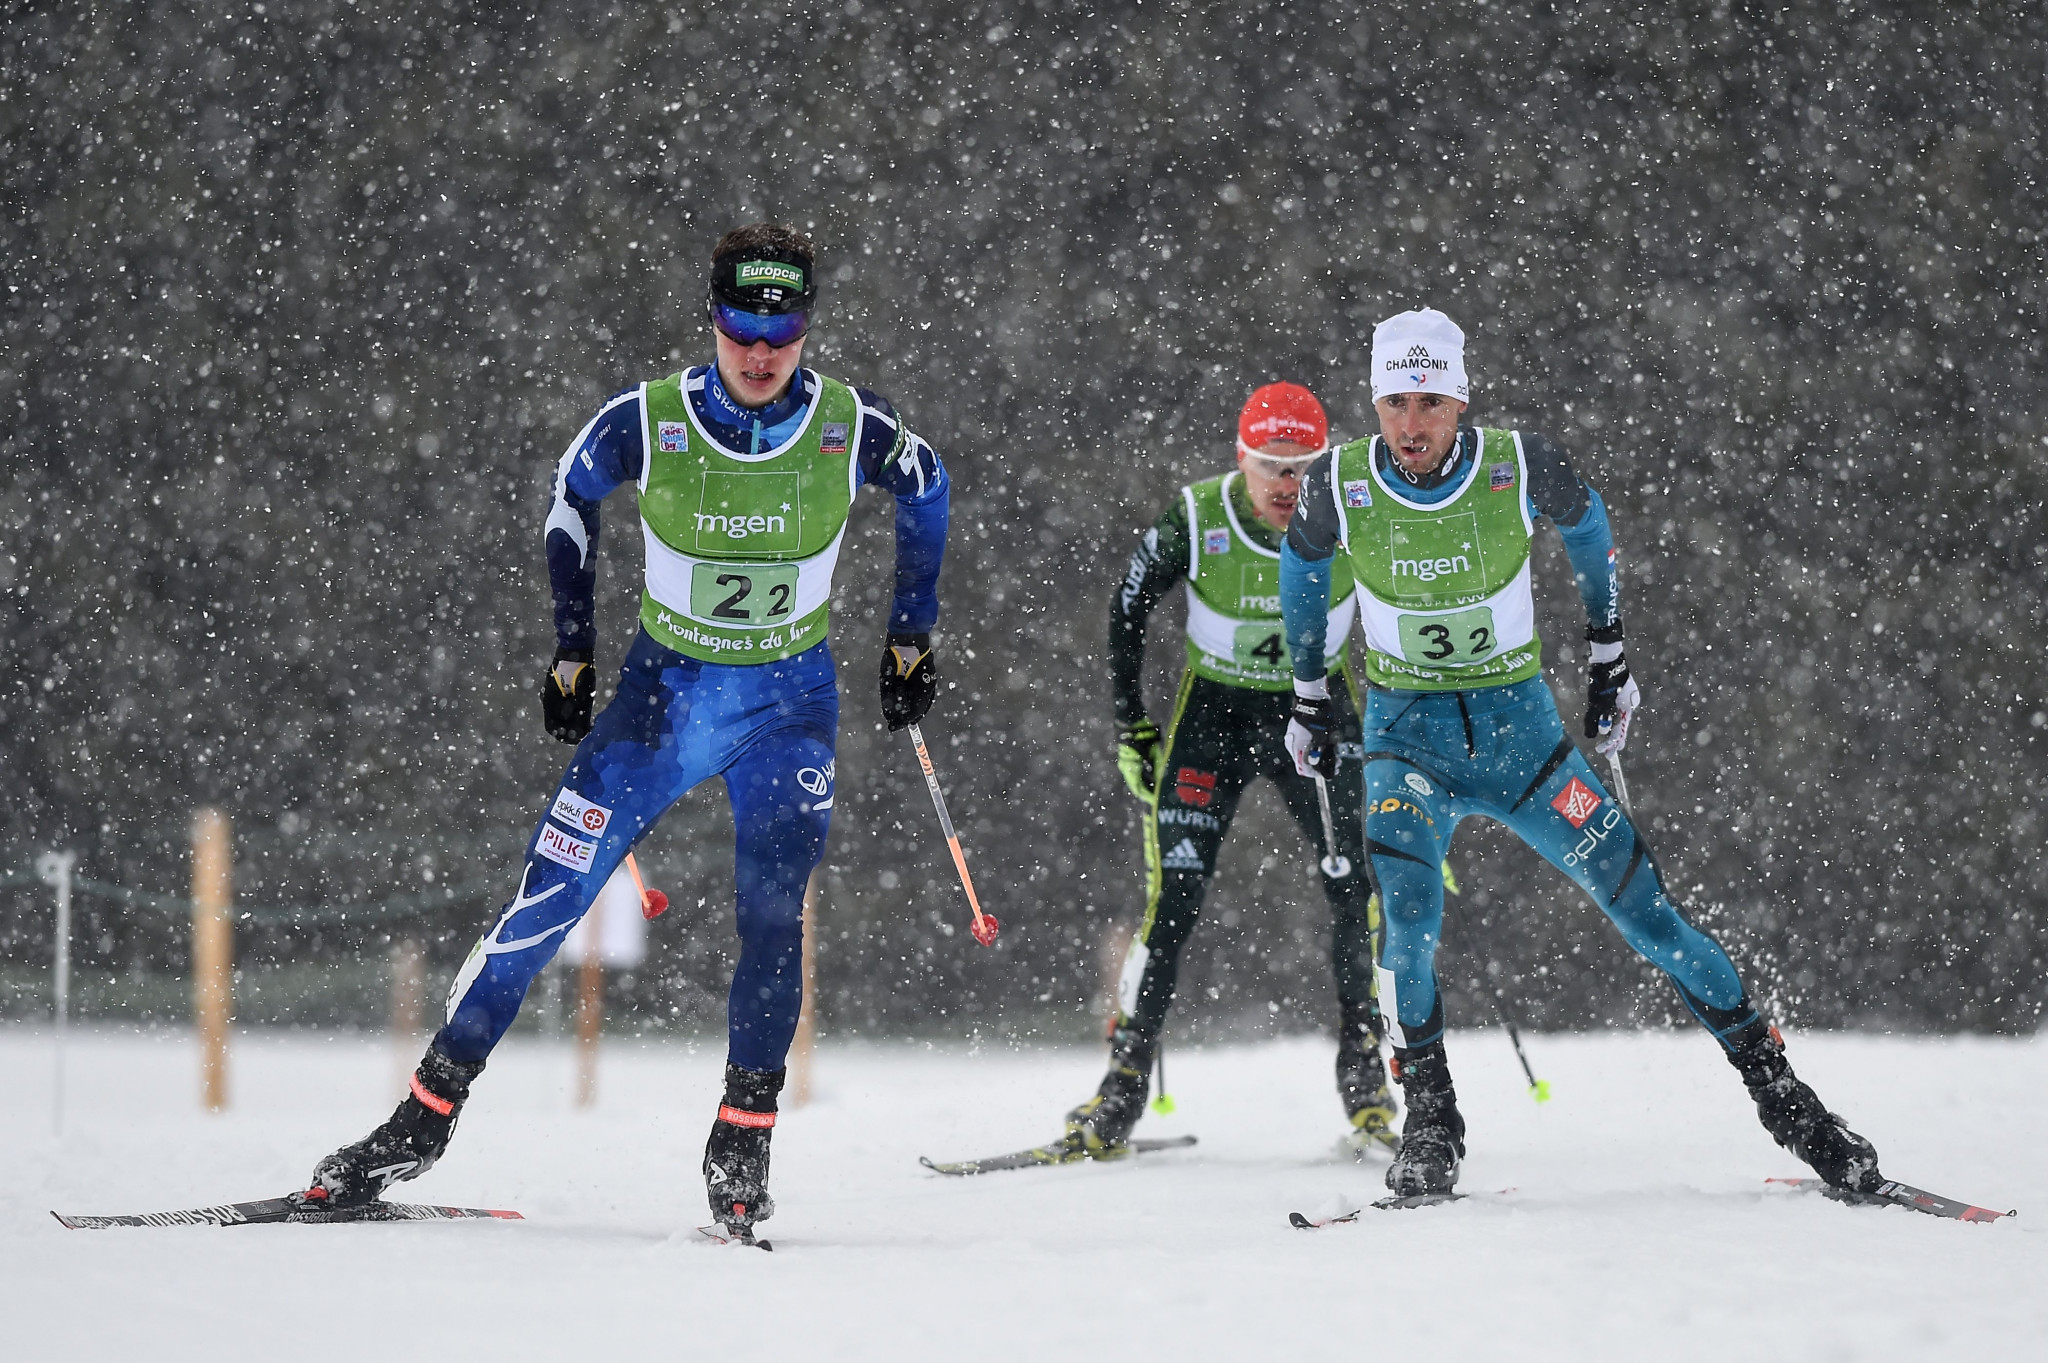 Flawless performance in fog earns Norway team gold in FIS Nordic Combined World Cup